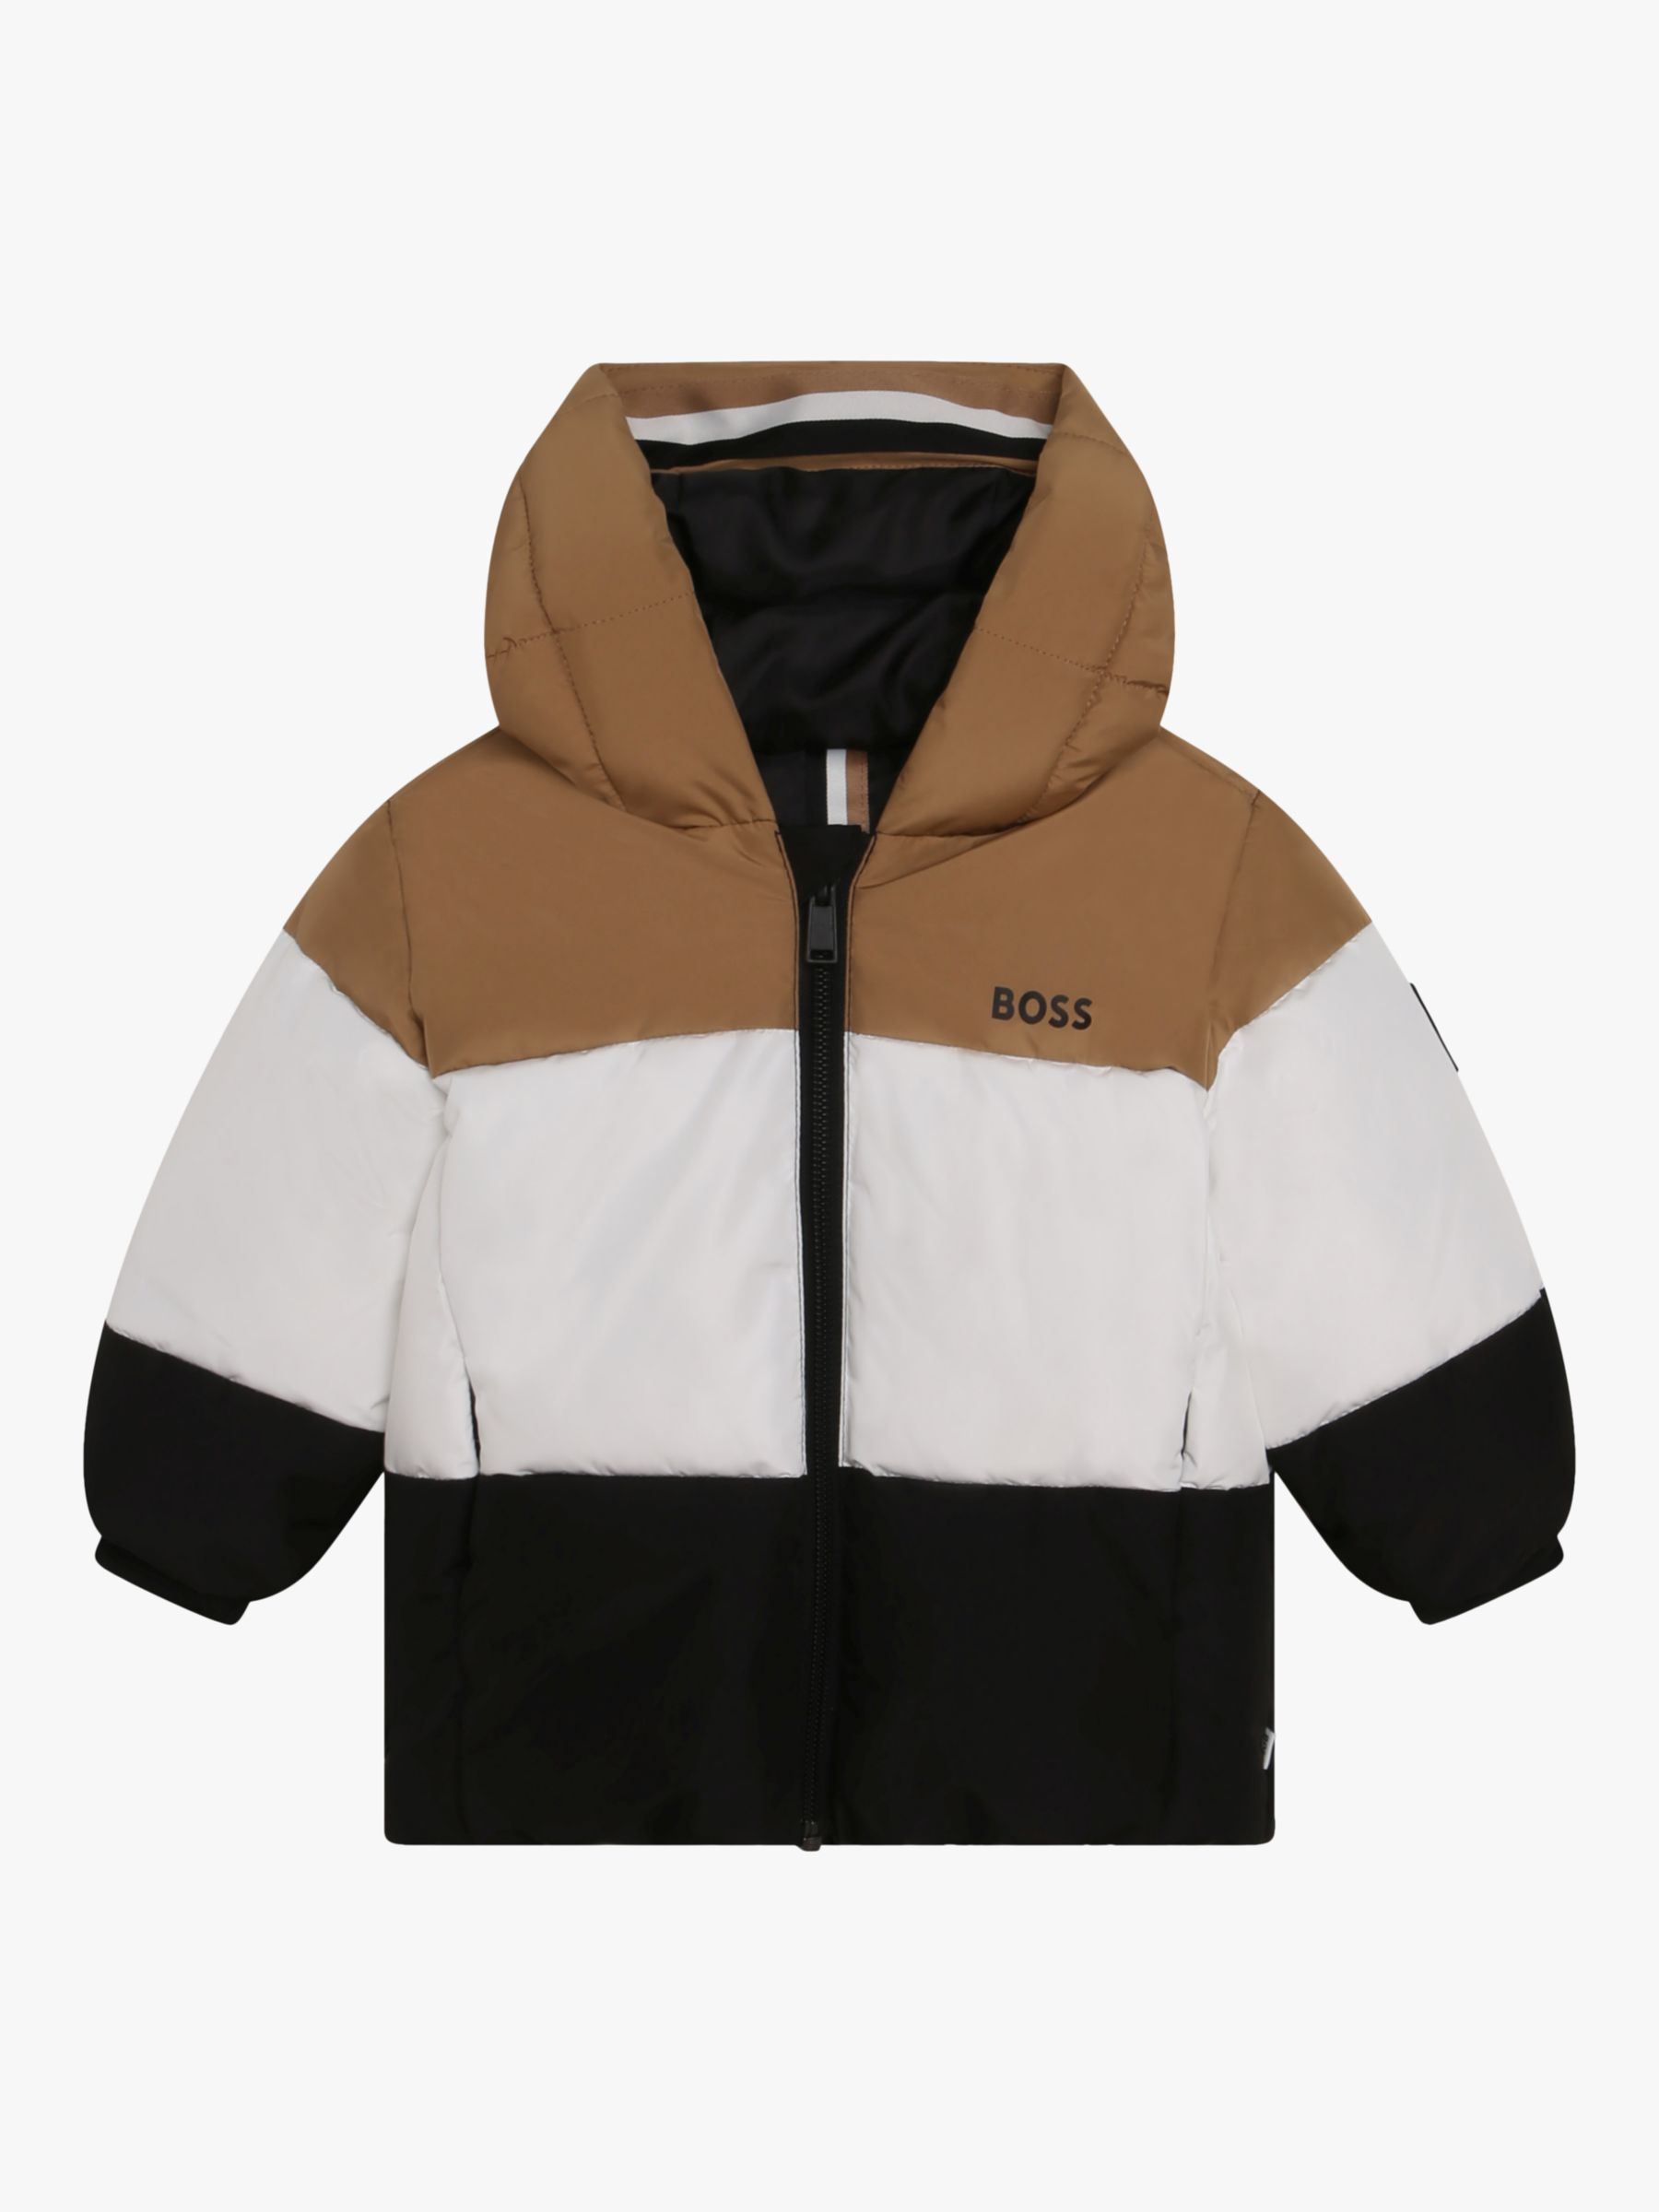 BOSS Baby Logo Hooded Puffer Jacket, Chocolate Brown, 3 months